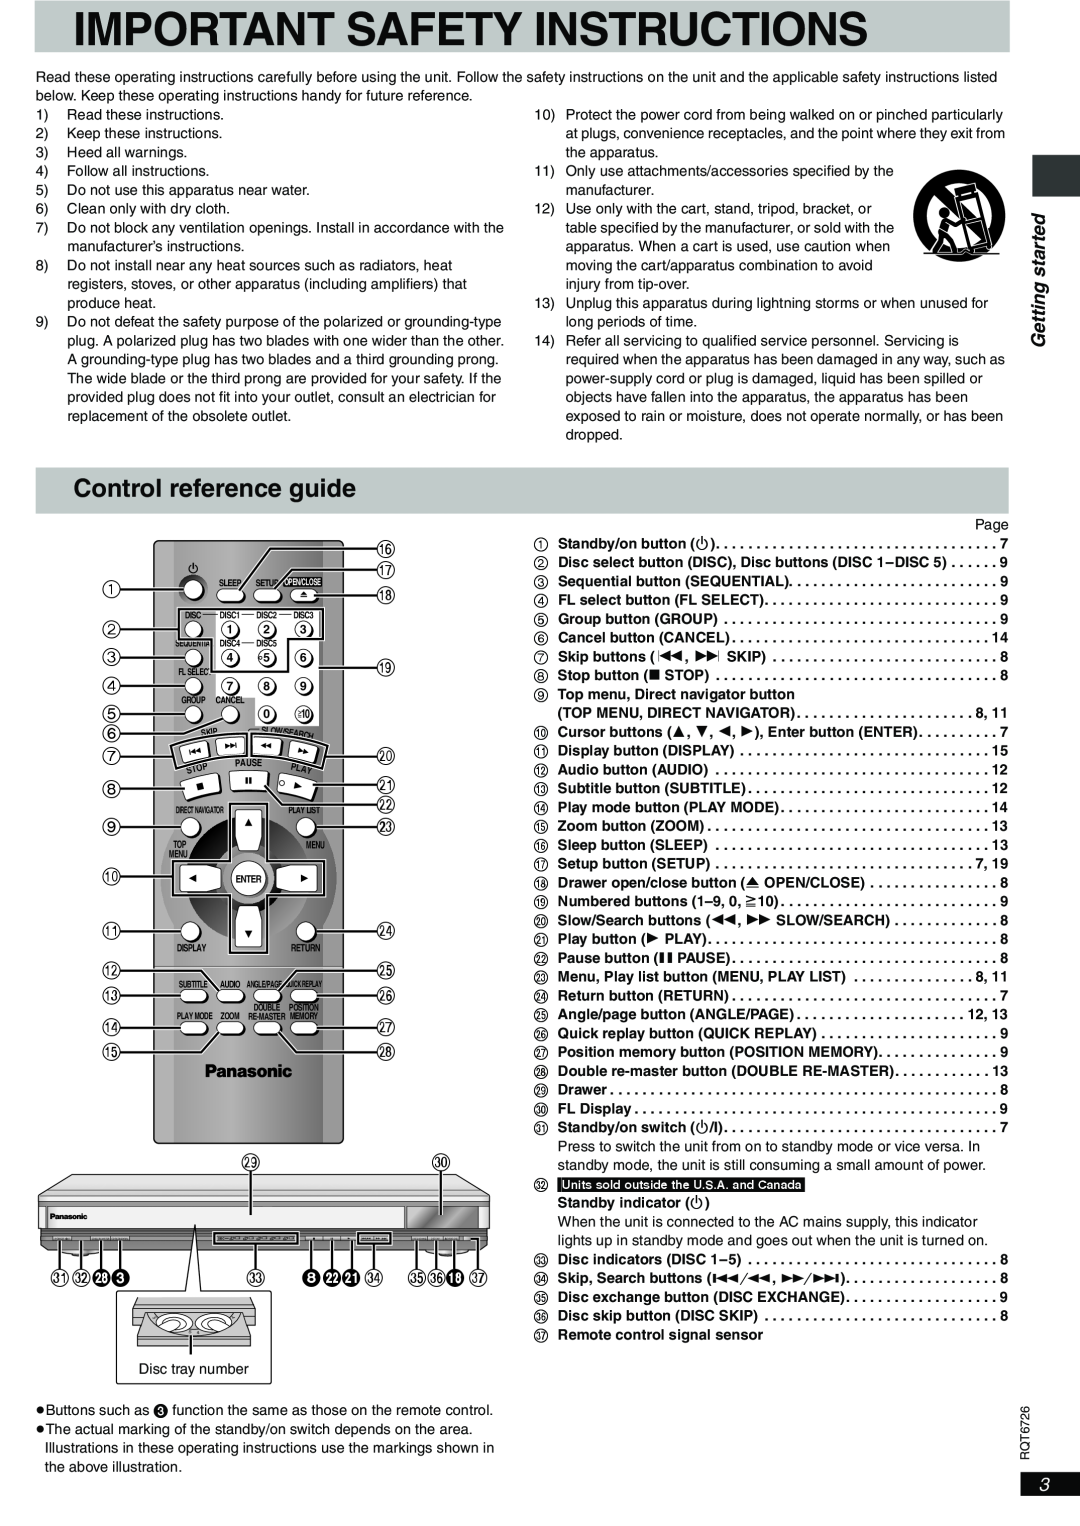 Panasonic DVD-F61 Control reference guide, Getting started, Important Safety Instructions, O PL3, 8FER, Stb U 